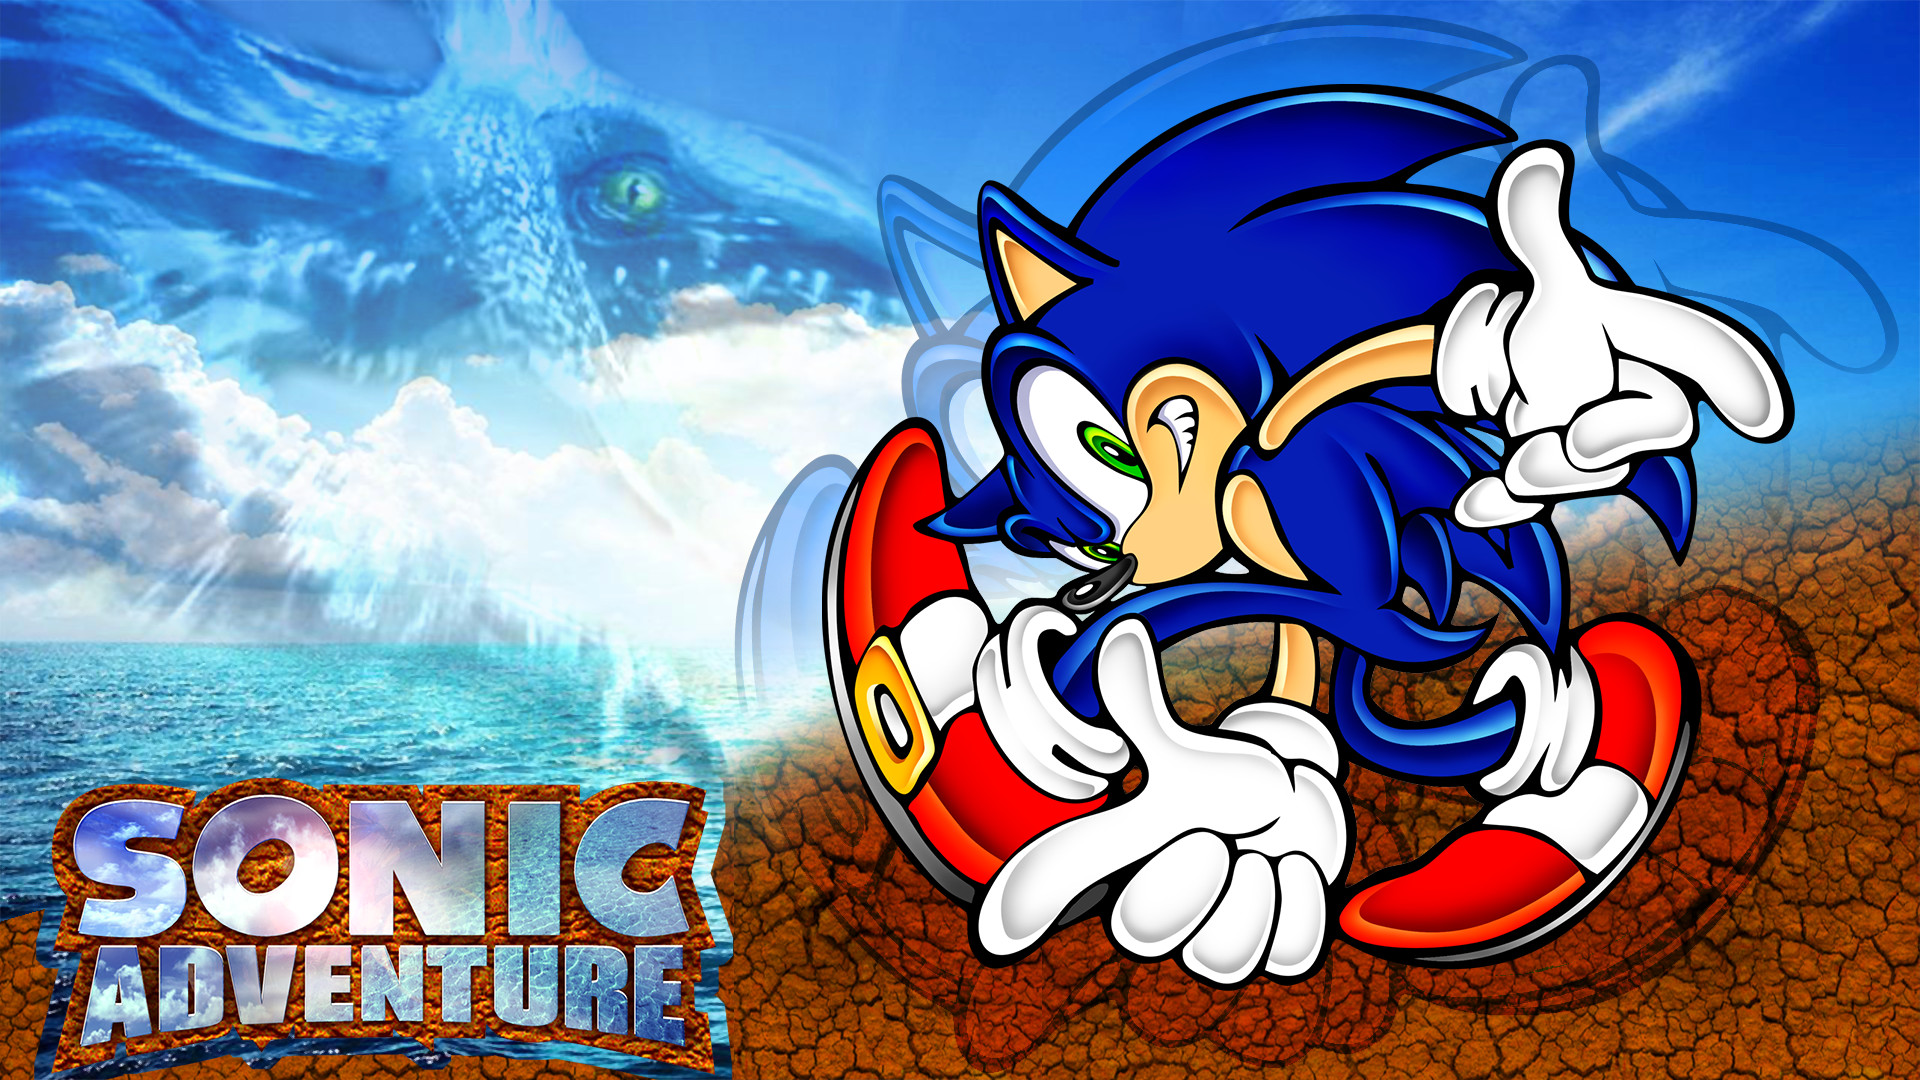 1920x1080 Sonic Adventure Background! by alsyouri2001 Sonic Adventure Background! by  alsyouri2001